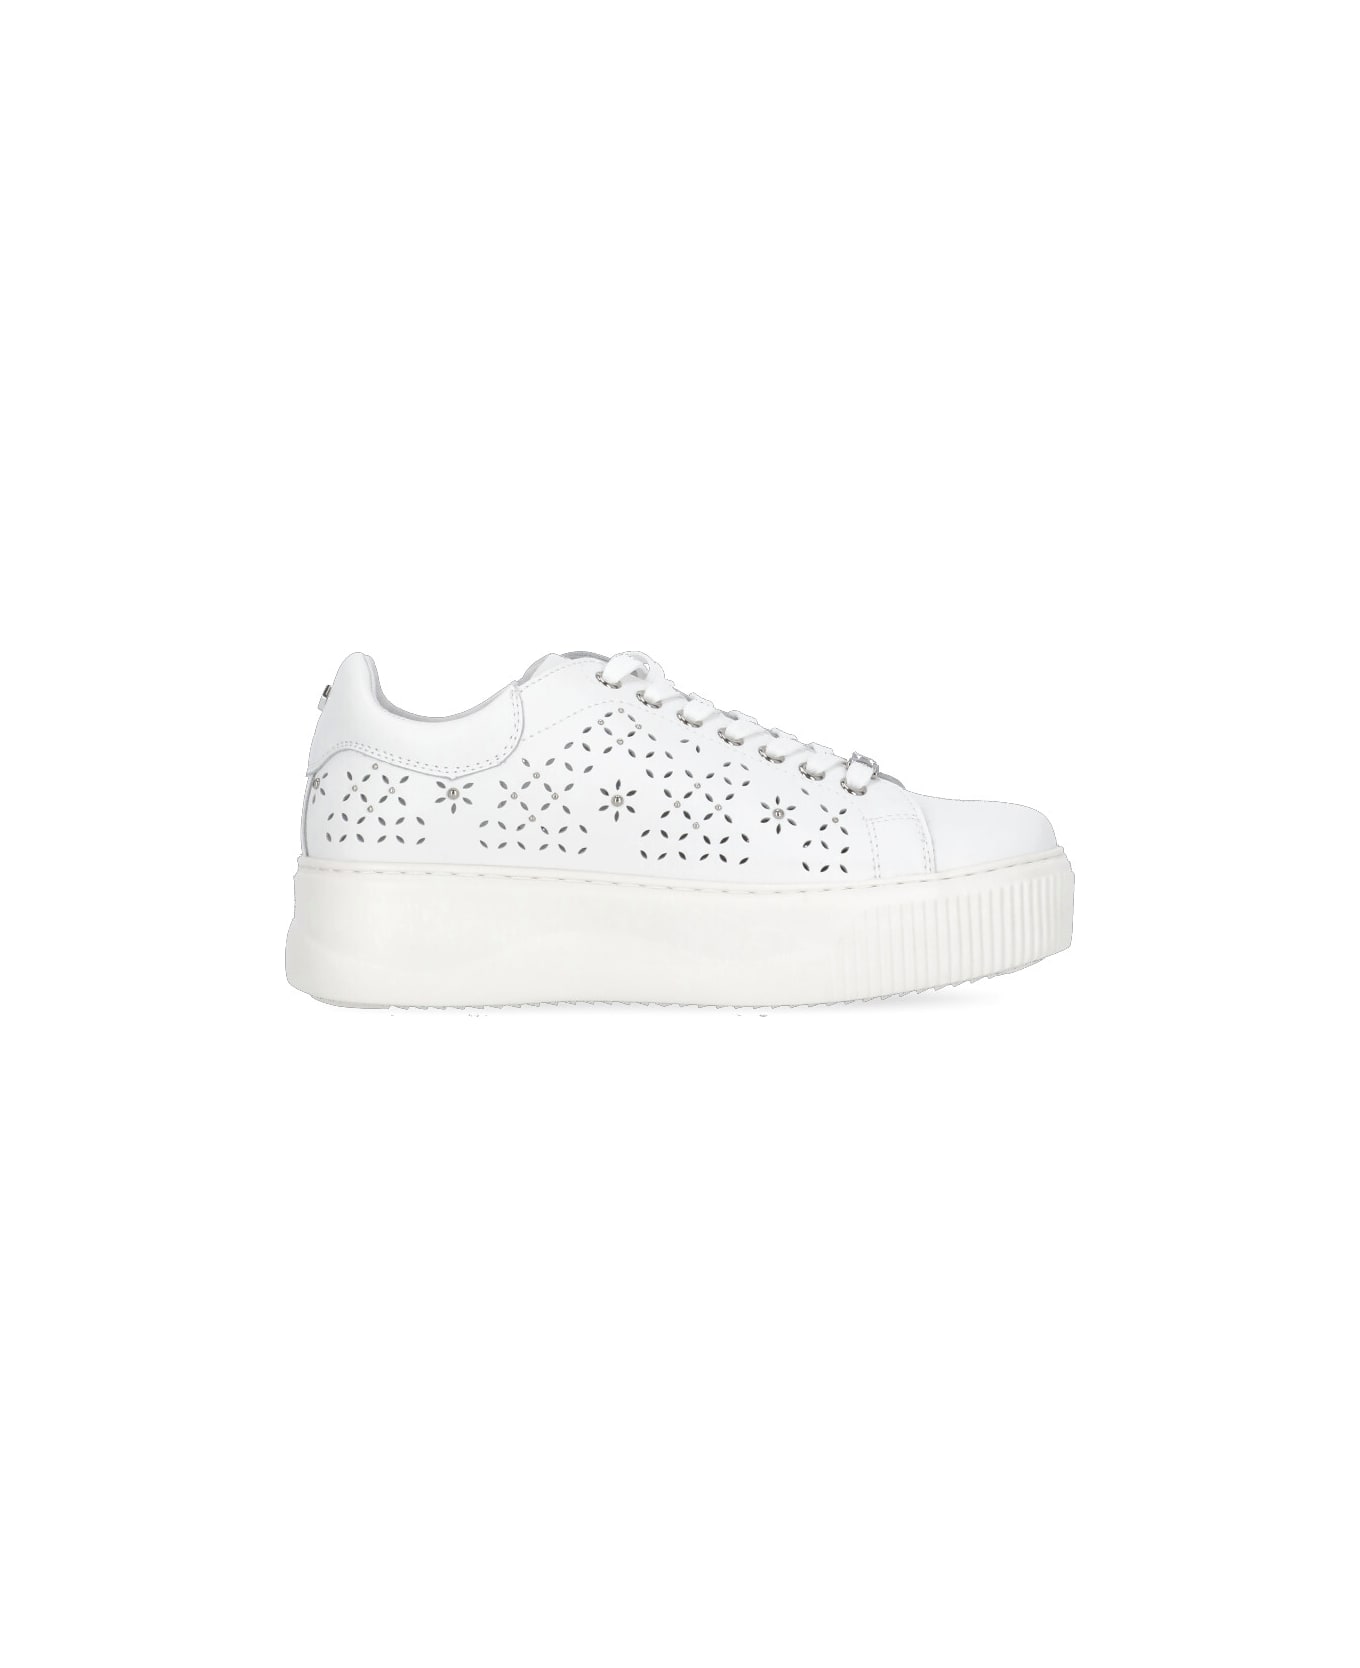 Cult Perry 3371 Sneakers - White